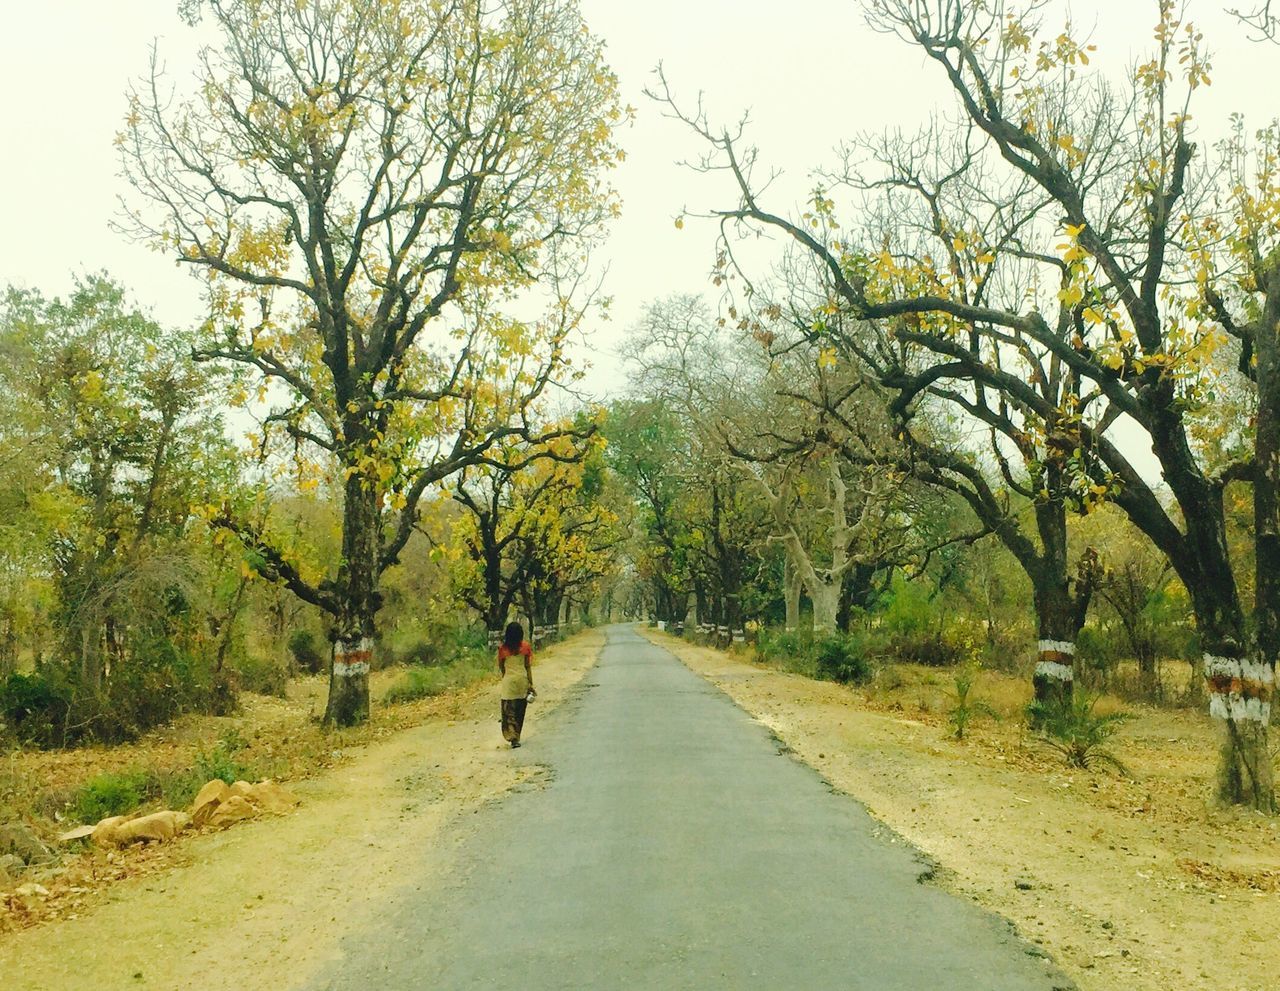 the way forward, tree, transportation, diminishing perspective, road, vanishing point, dirt road, clear sky, country road, tranquility, growth, nature, walking, rear view, tranquil scene, treelined, day, street